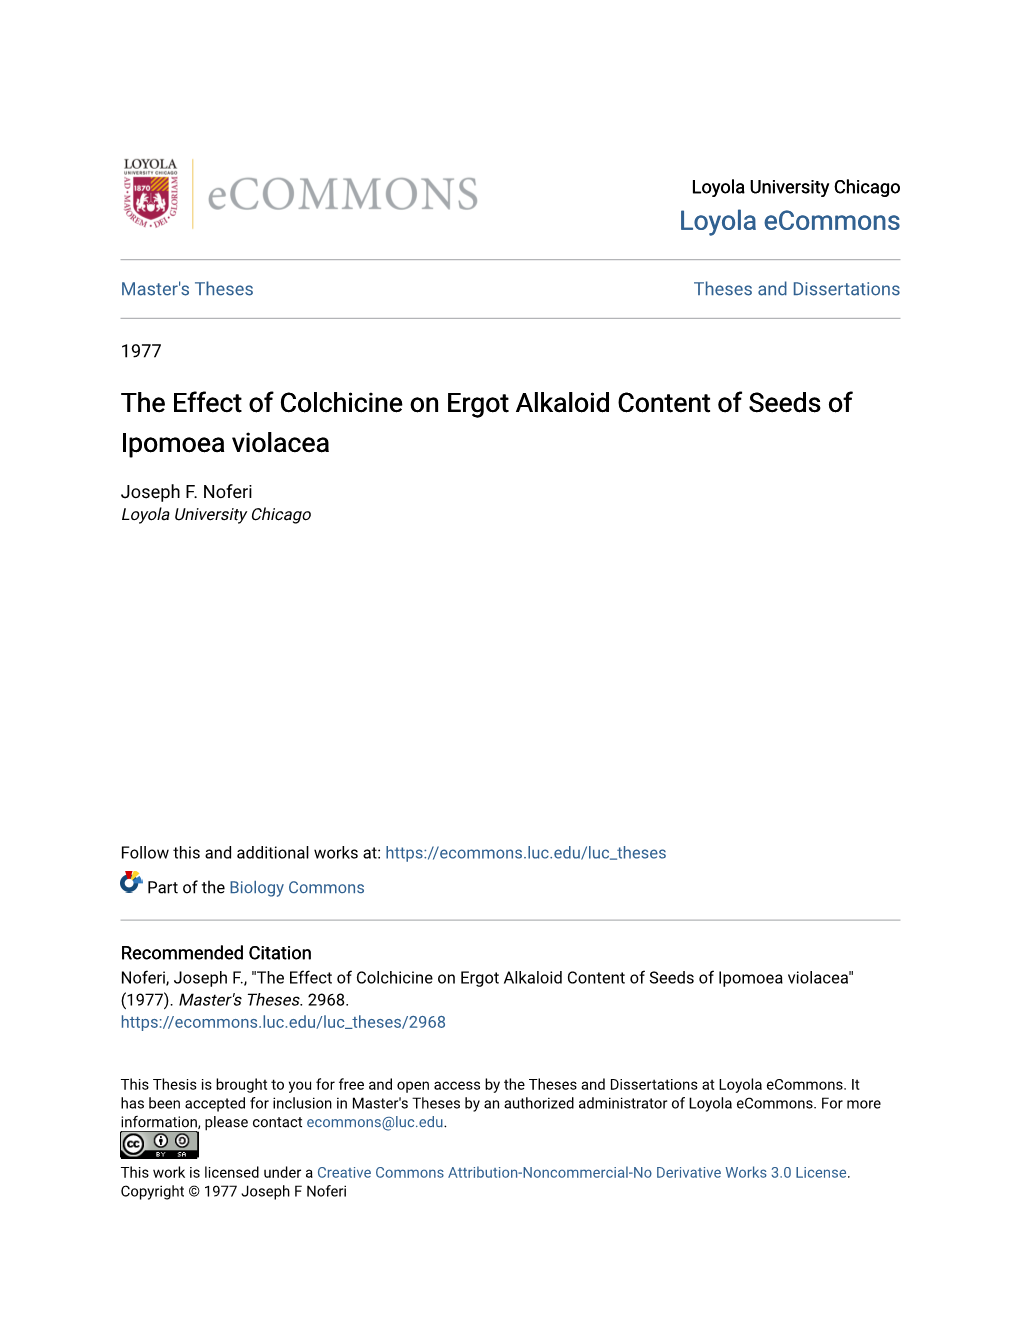 The Effect of Colchicine on Ergot Alkaloid Content of Seeds of Ipomoea Violacea